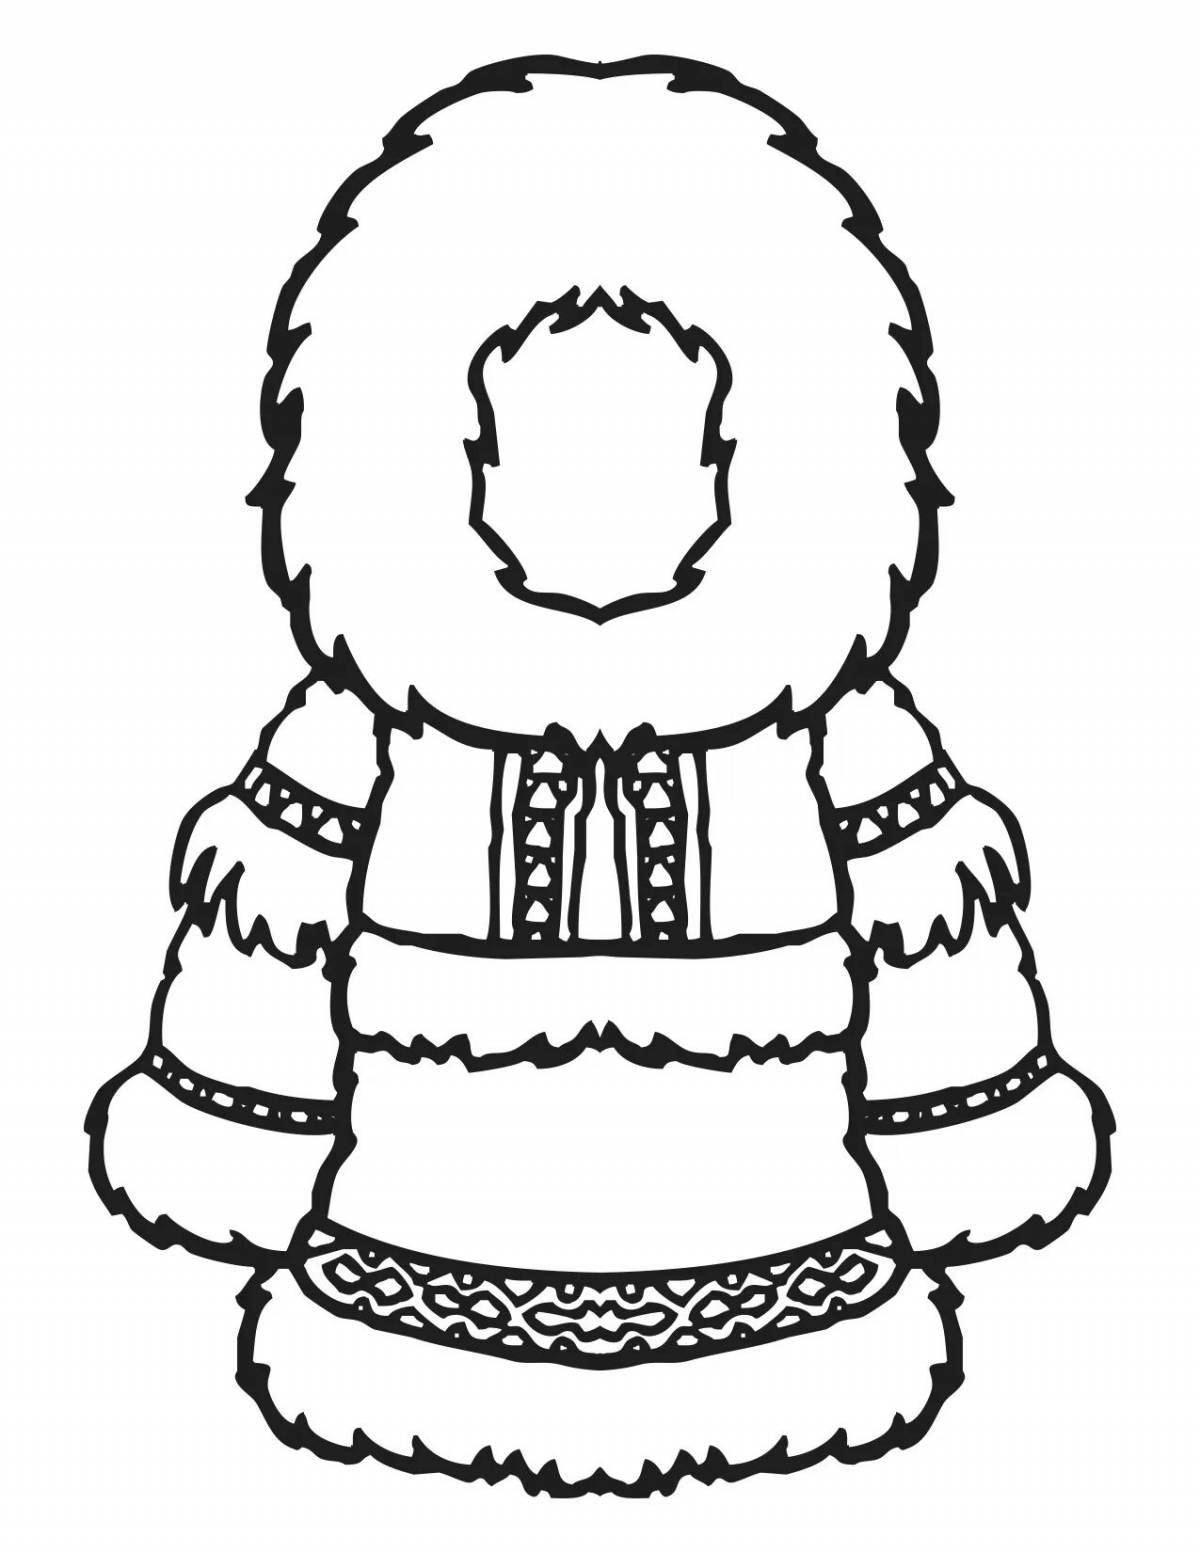 Coloring book artistic Chukchi national costume